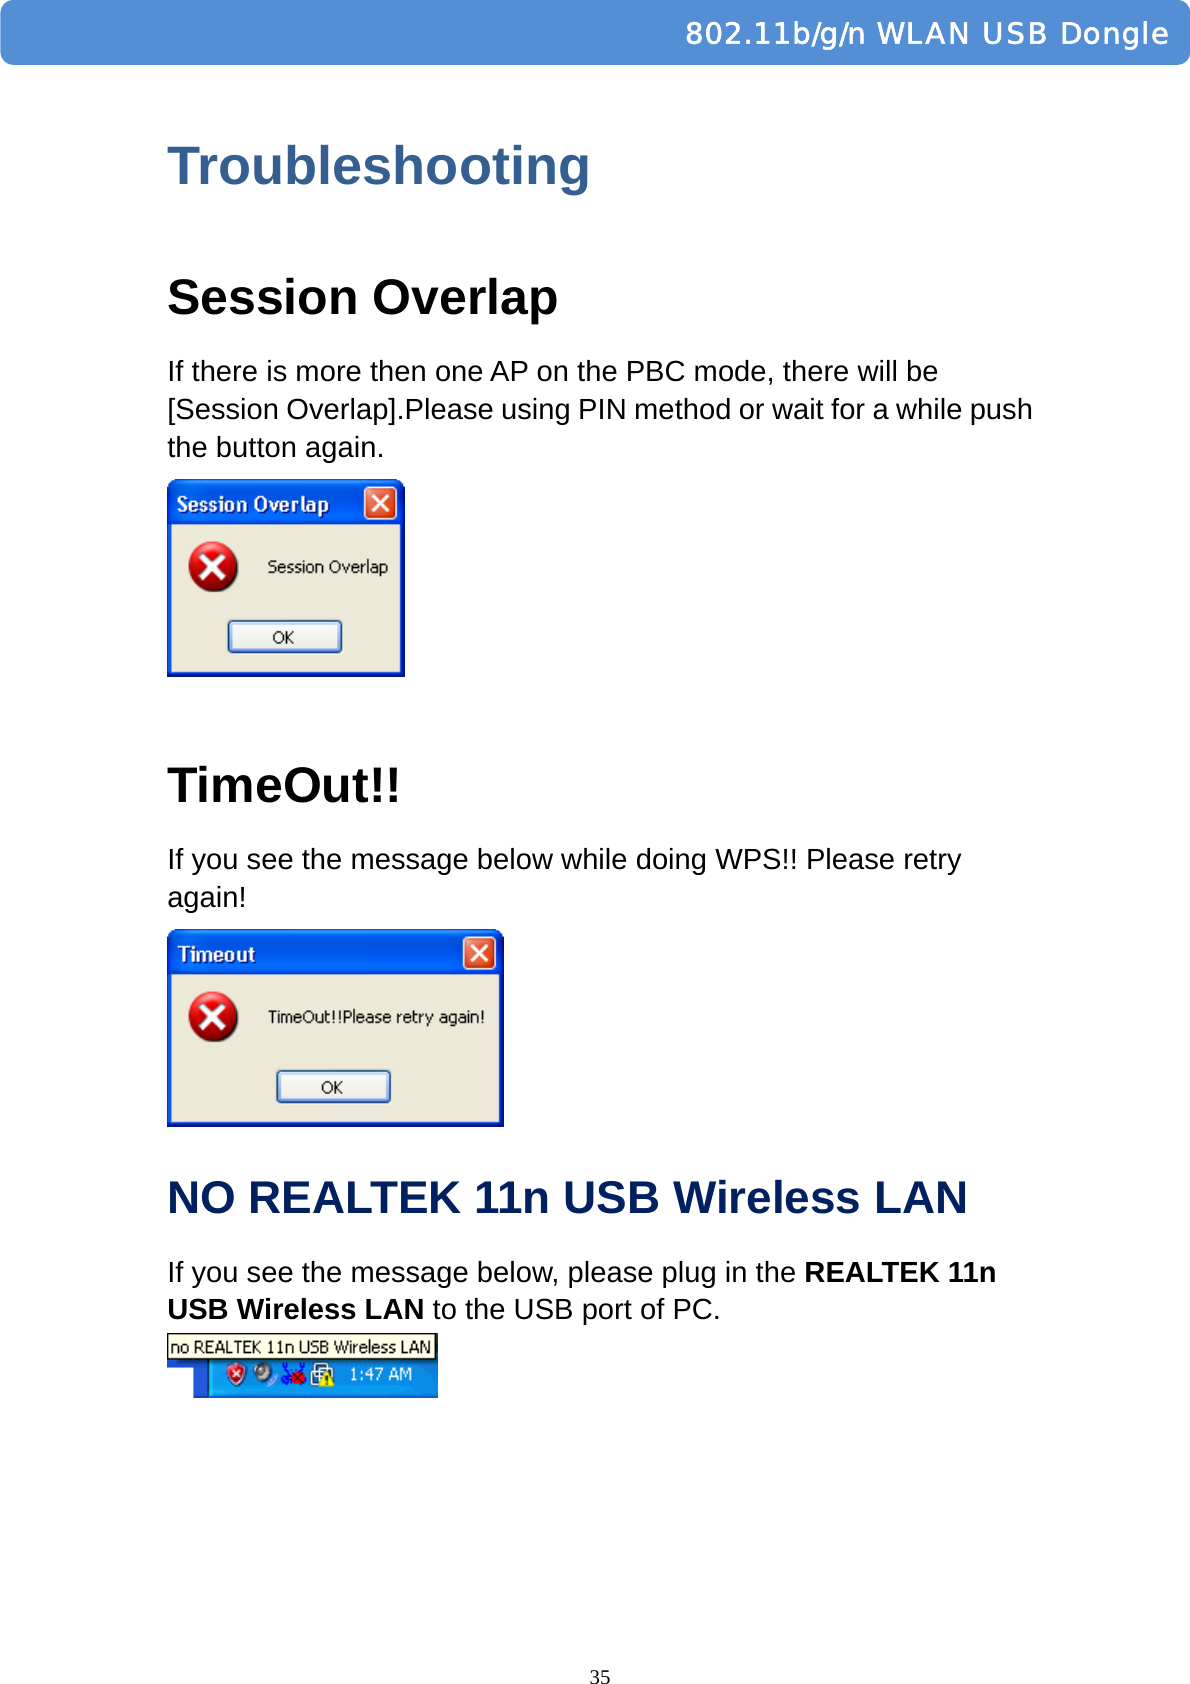  35         802.11b/g/n WLAN USB DongleTroubleshooting Session Overlap If there is more then one AP on the PBC mode, there will be [Session Overlap].Please using PIN method or wait for a while push the button again.   TimeOut!! If you see the message below while doing WPS!! Please retry again!  NO REALTEK 11n USB Wireless LAN   If you see the message below, please plug in the REALTEK 11n USB Wireless LAN to the USB port of PC.   